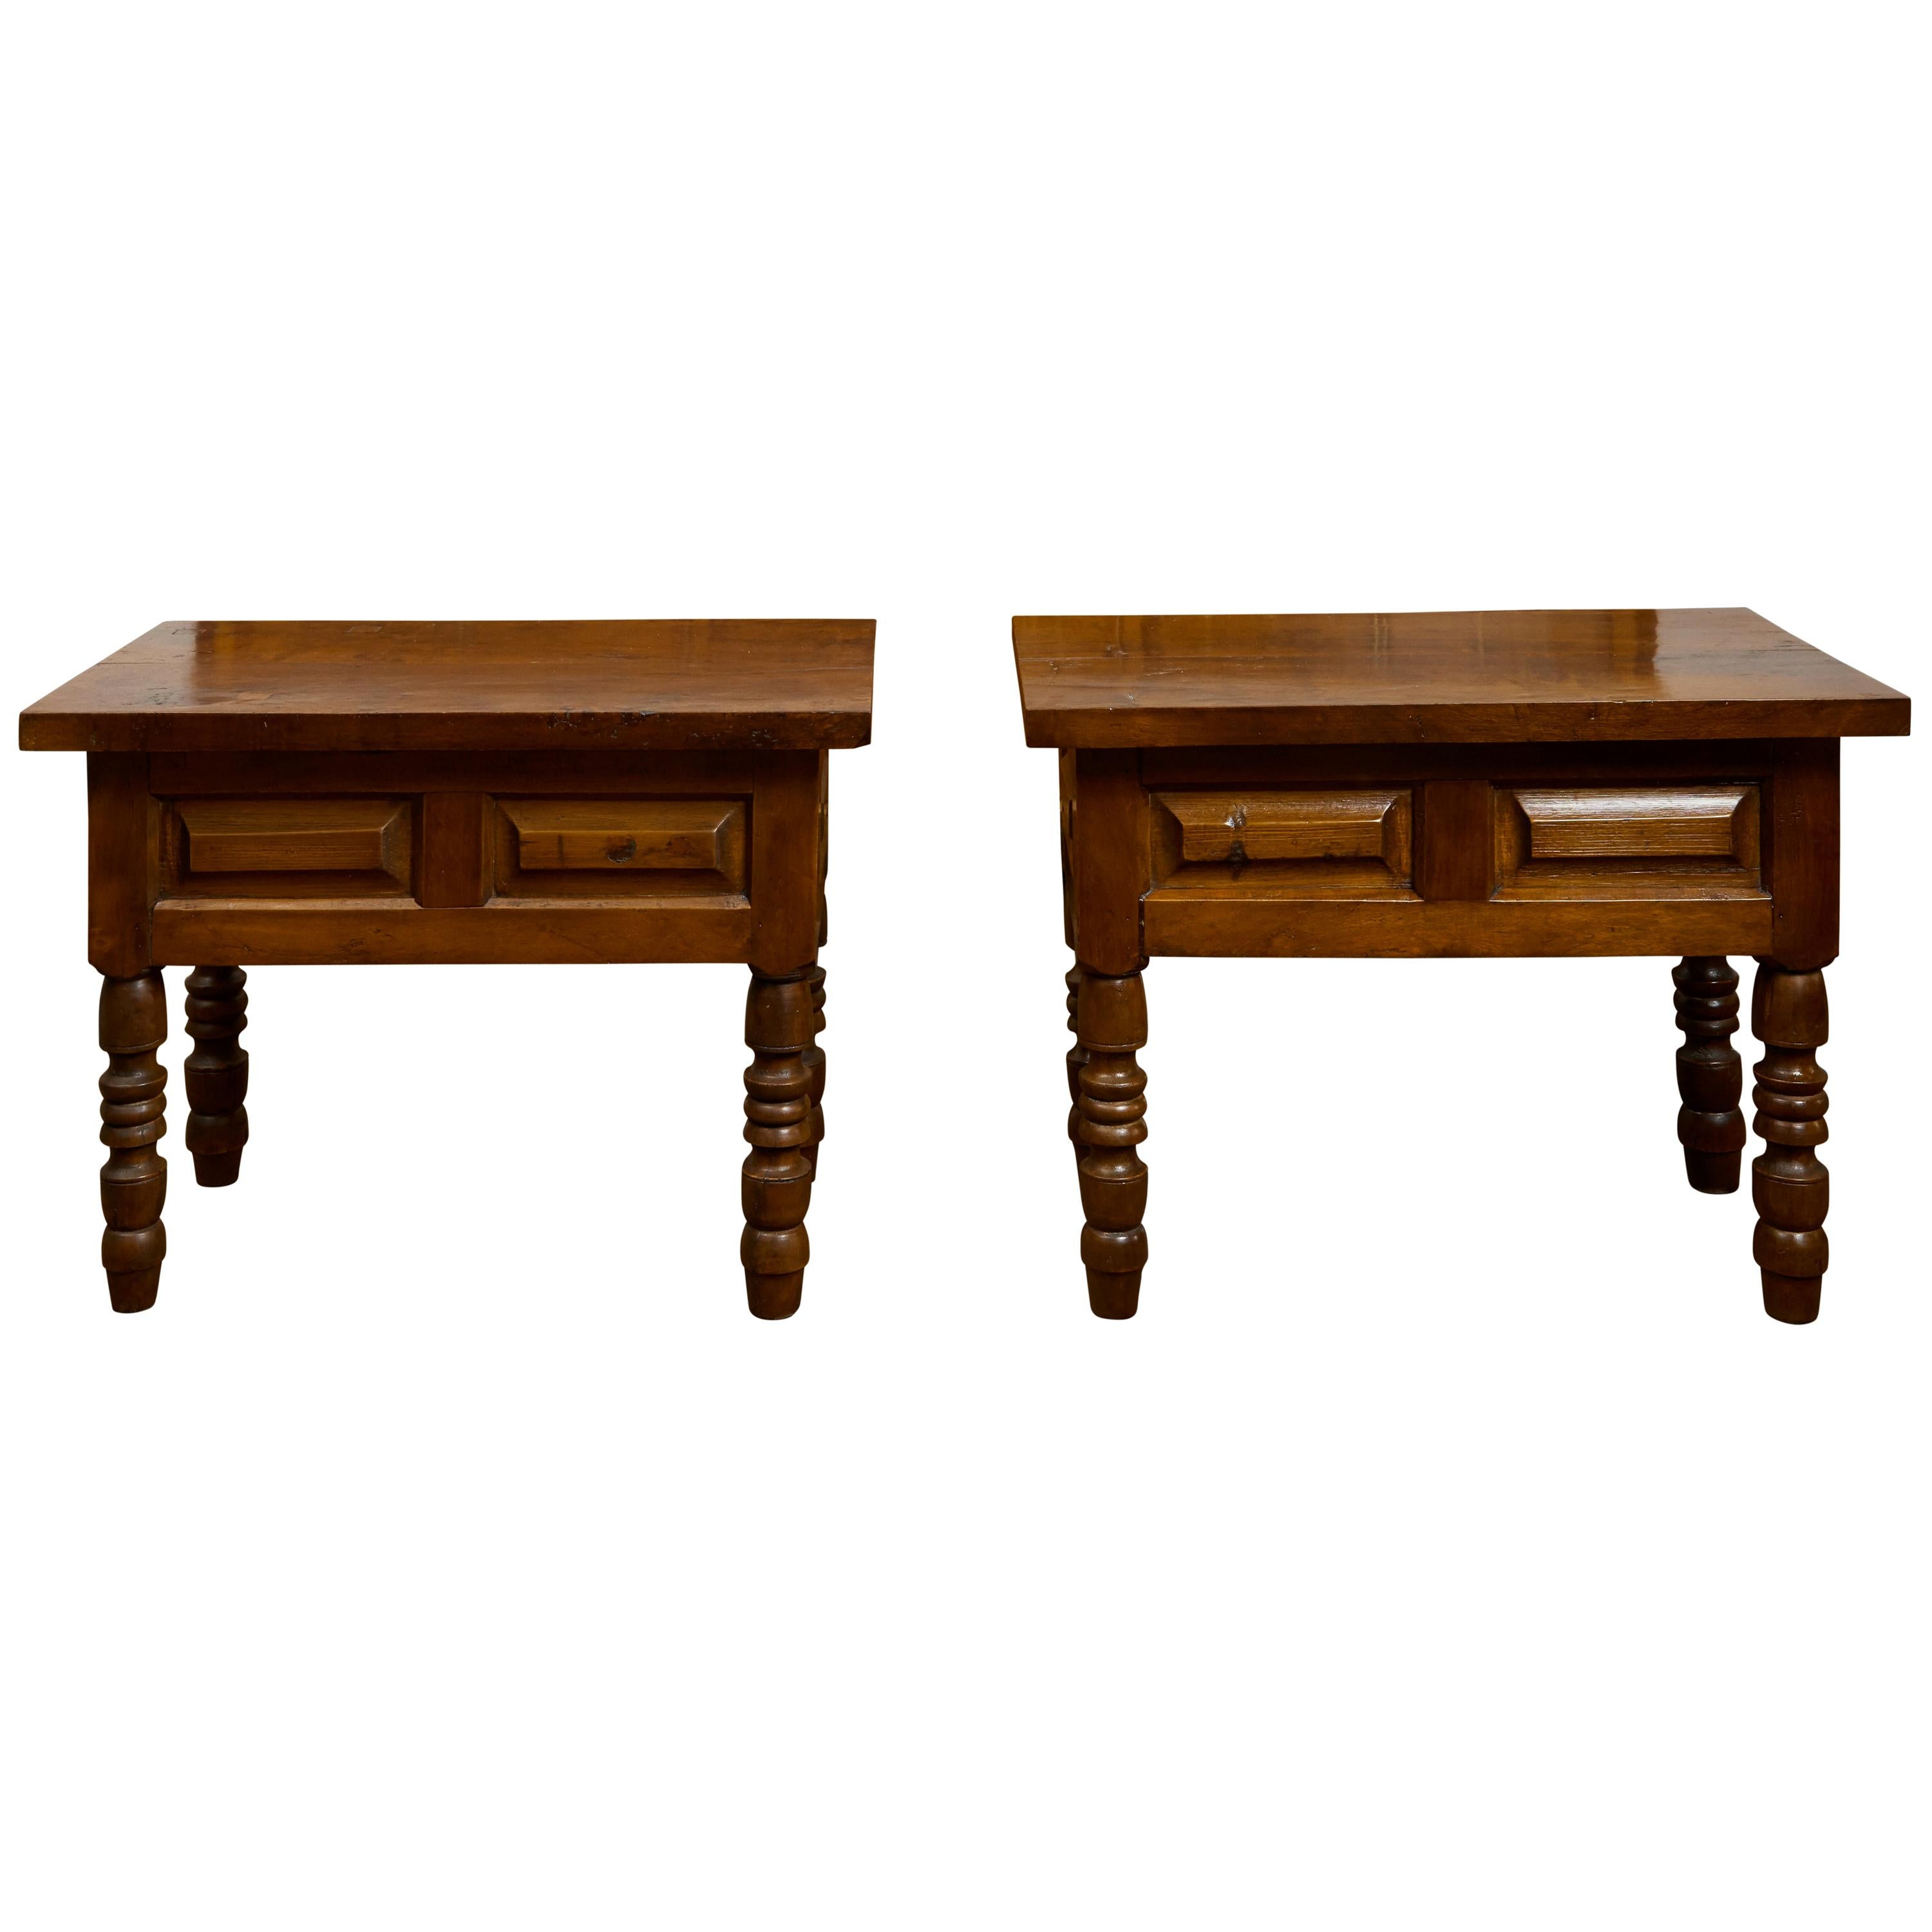 Pair of 19th Century Walnut Side Tables with Raised Panels and Turned Legs